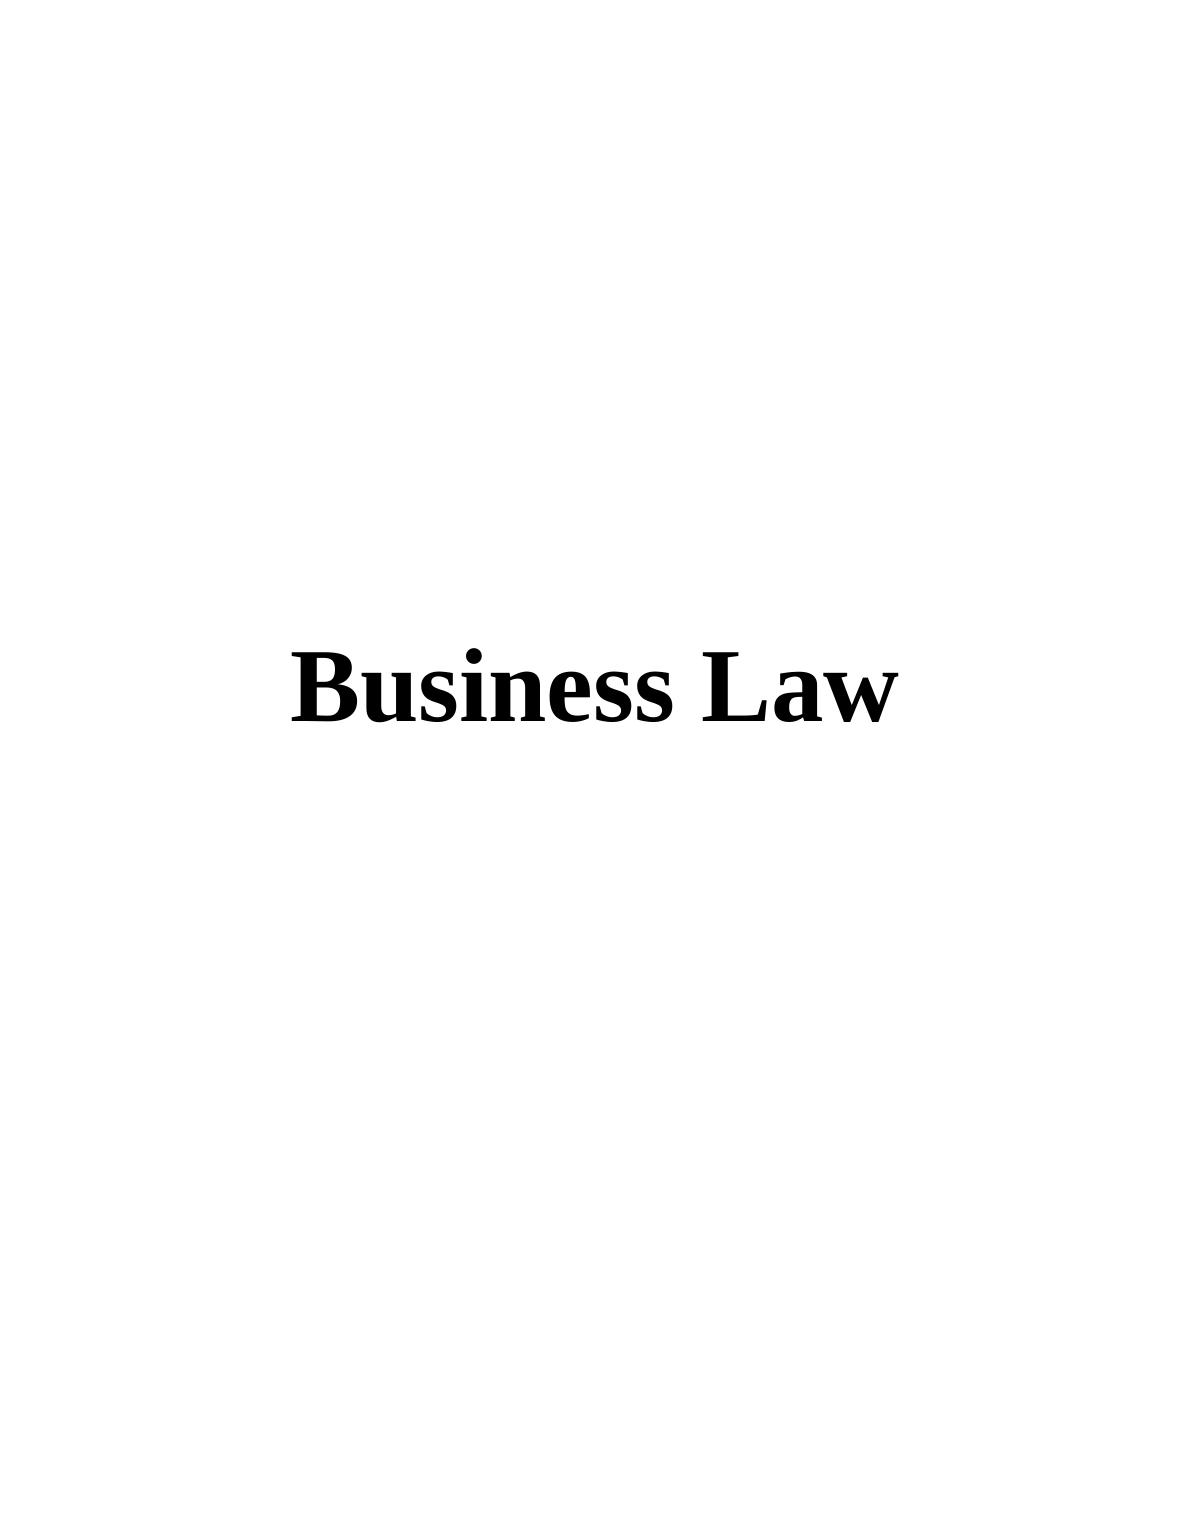 Report on Business Law in United Kingdom_1